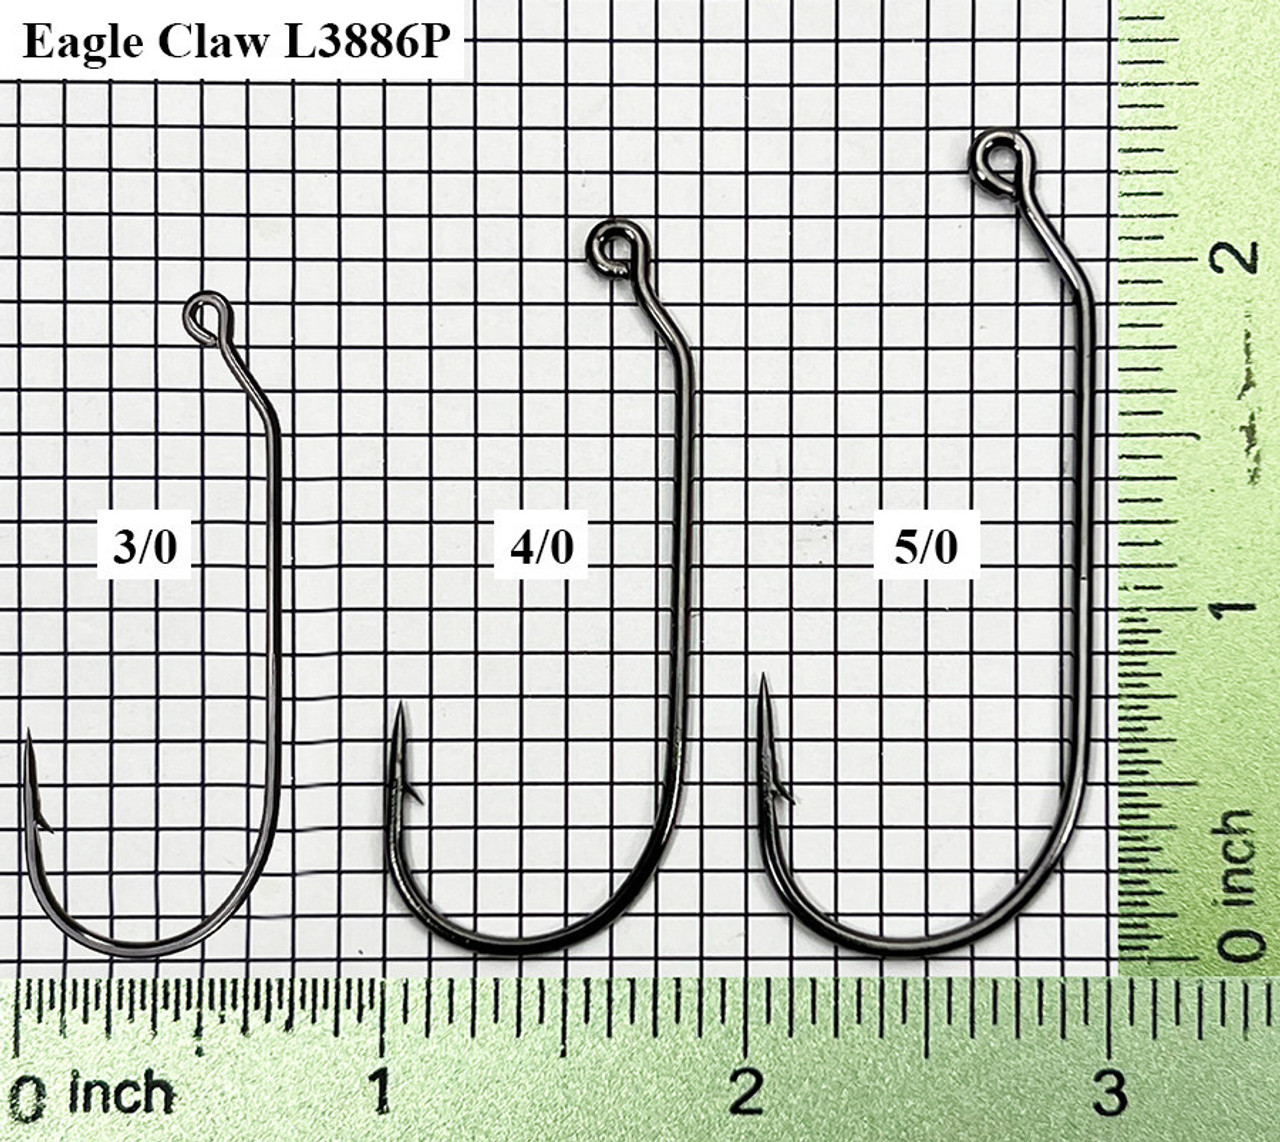 Eagle Claw L3886P Jig Hook Sizes 3/0-5/0 - Barlow's Tackle